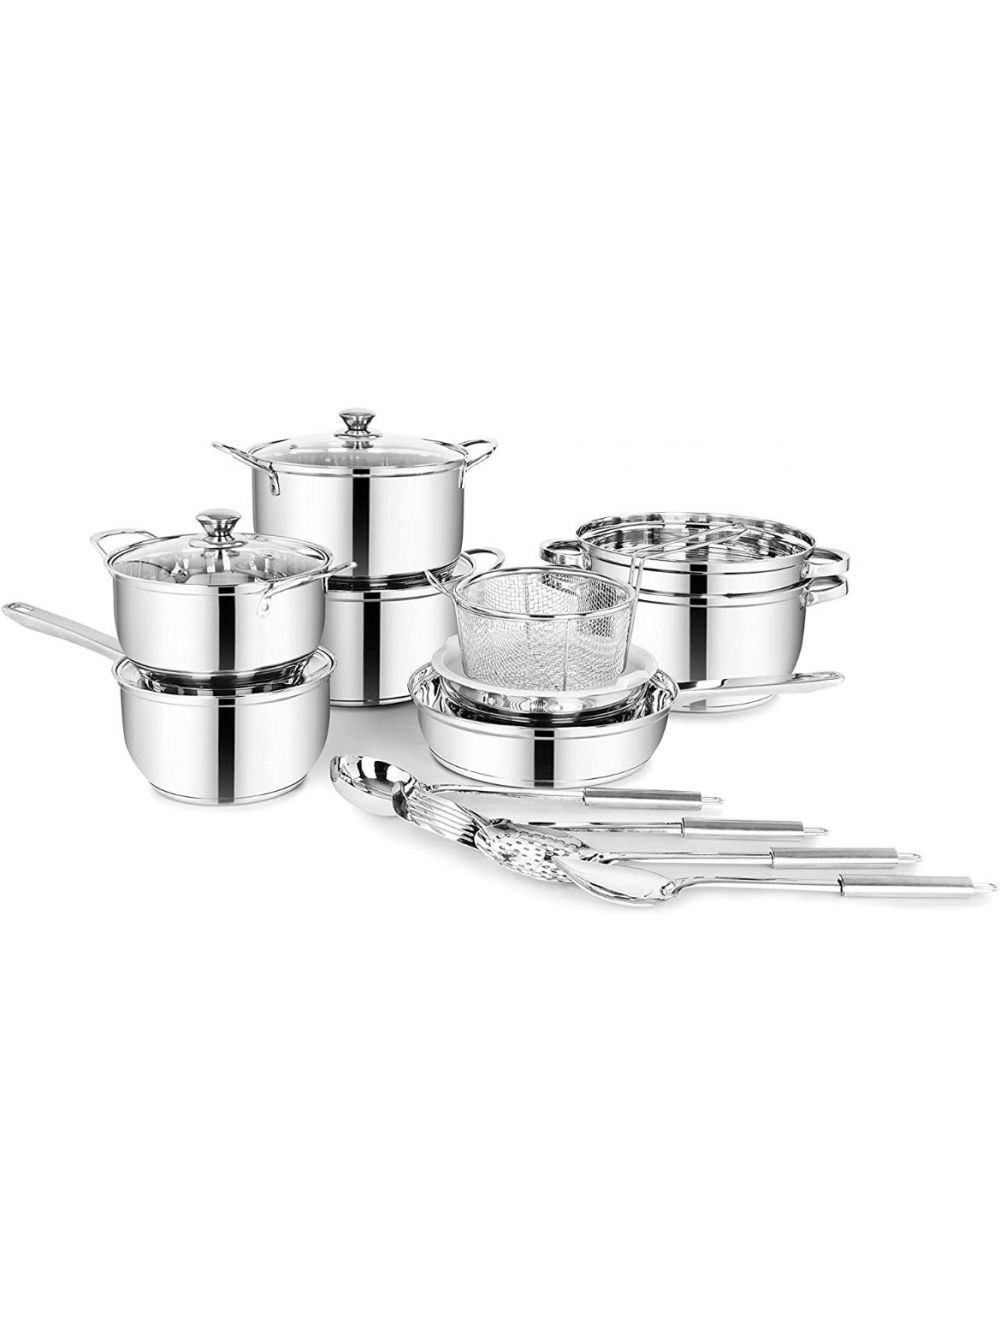 Classic Essentials Supreme Stainless Steel Cookware Set Silver 17-Piece-CE SV17